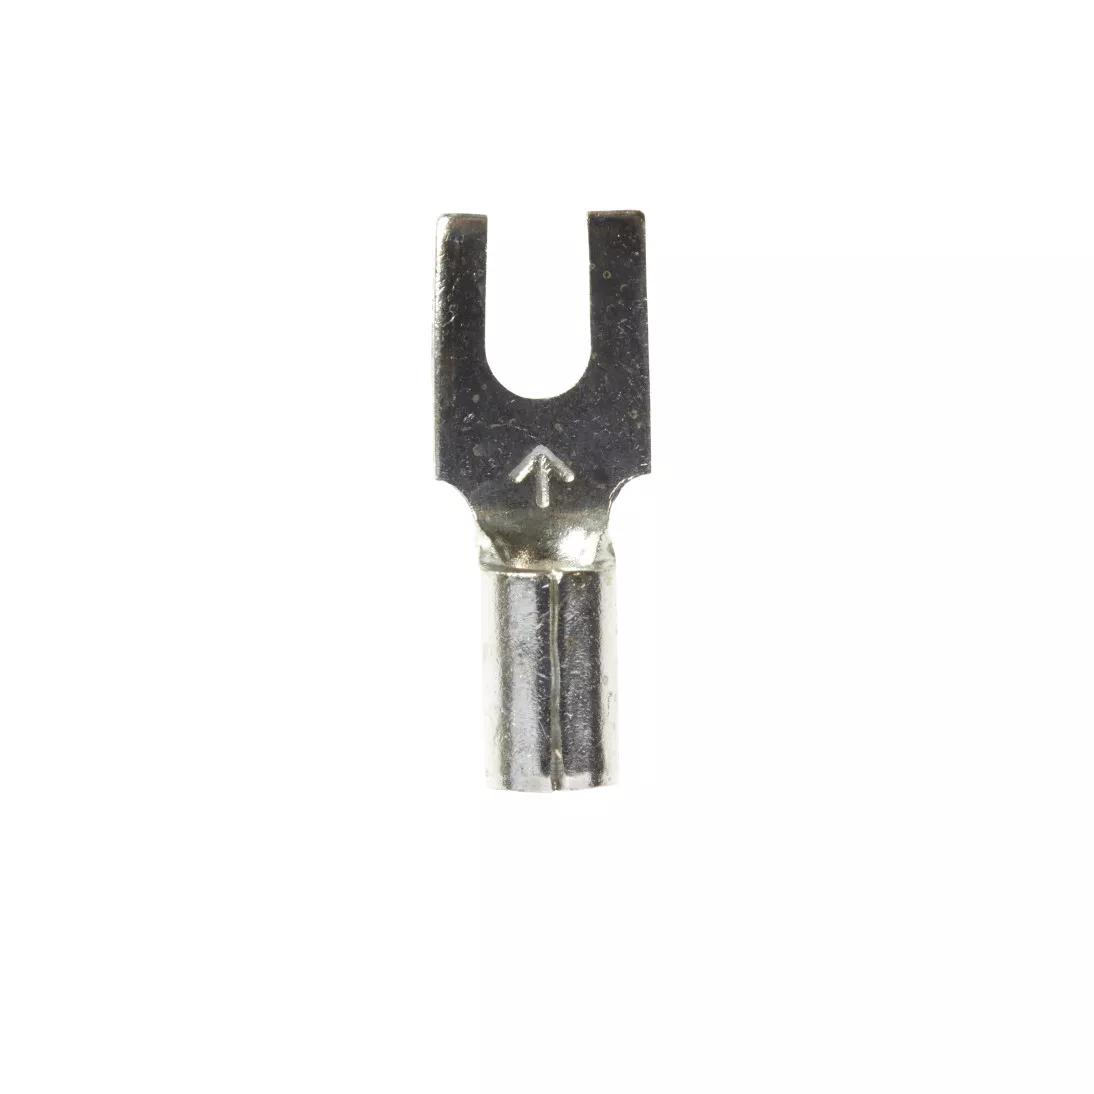 3M™ Scotchlok™ Block Fork, Non-Insulated Butted Seam MU14-4FB/SK, Stud
Size 4, suitable for use in a terminal block, 1000/Case